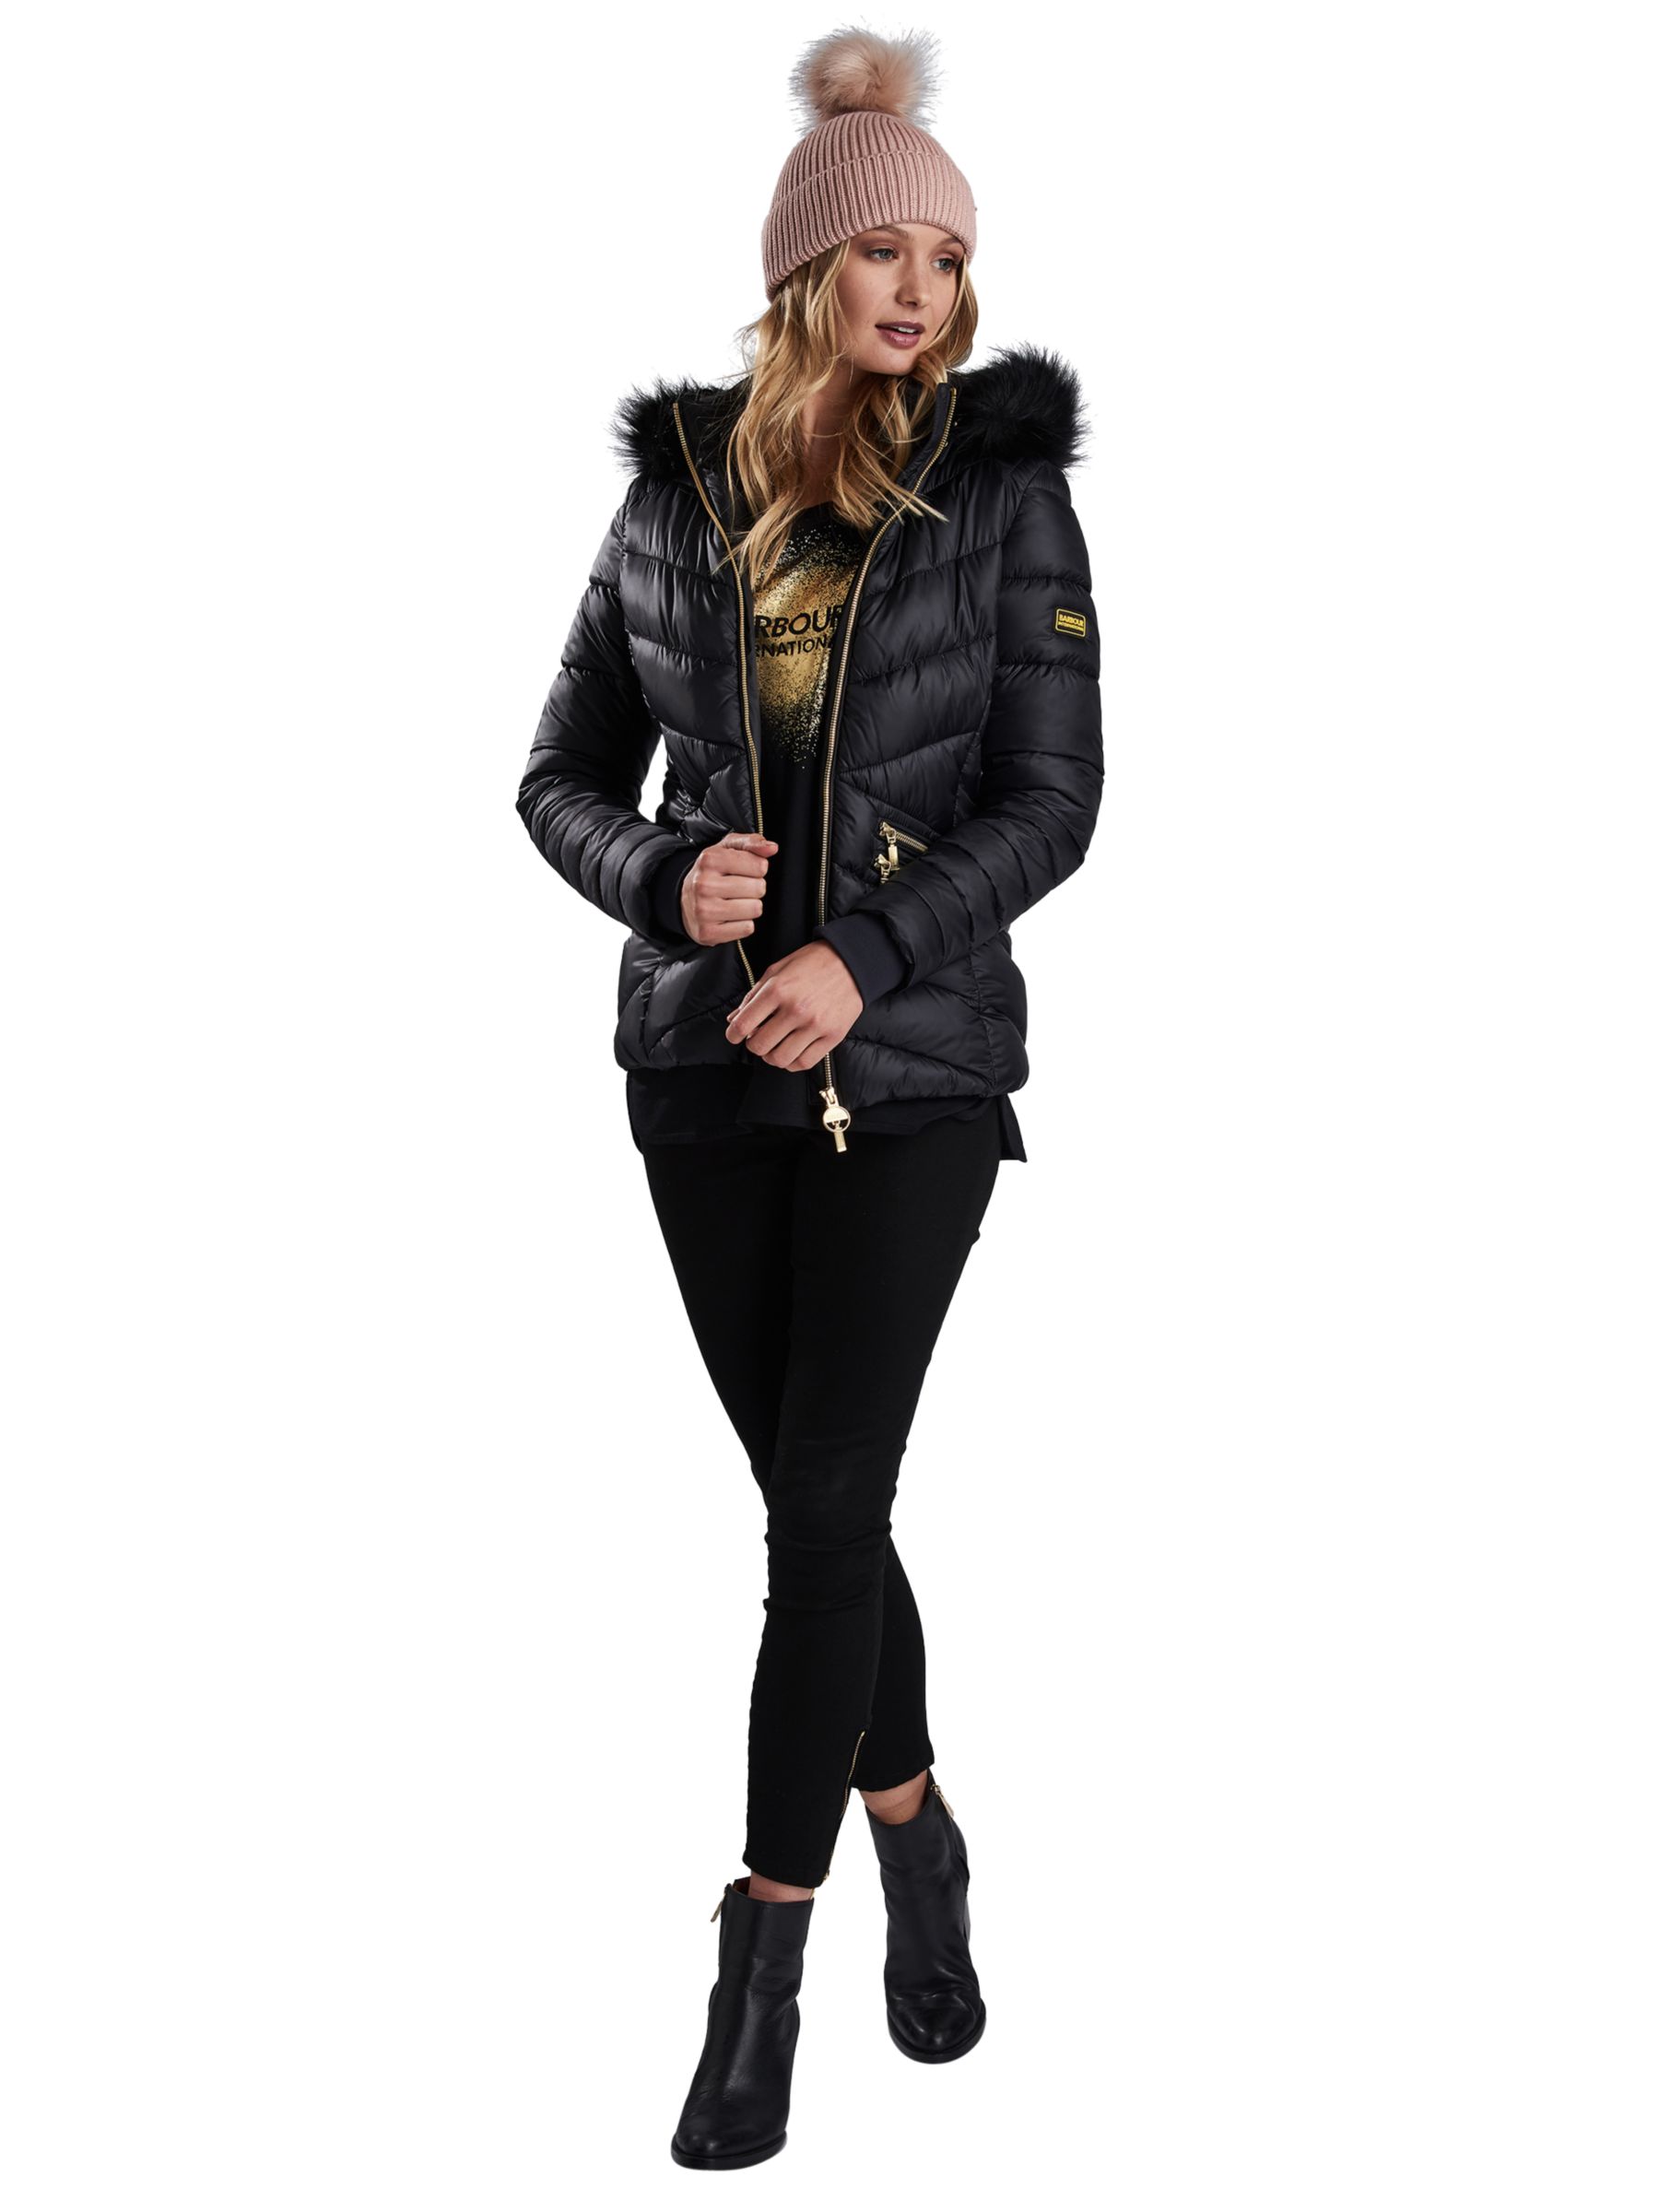 women's barbour international turbo quilted jacket